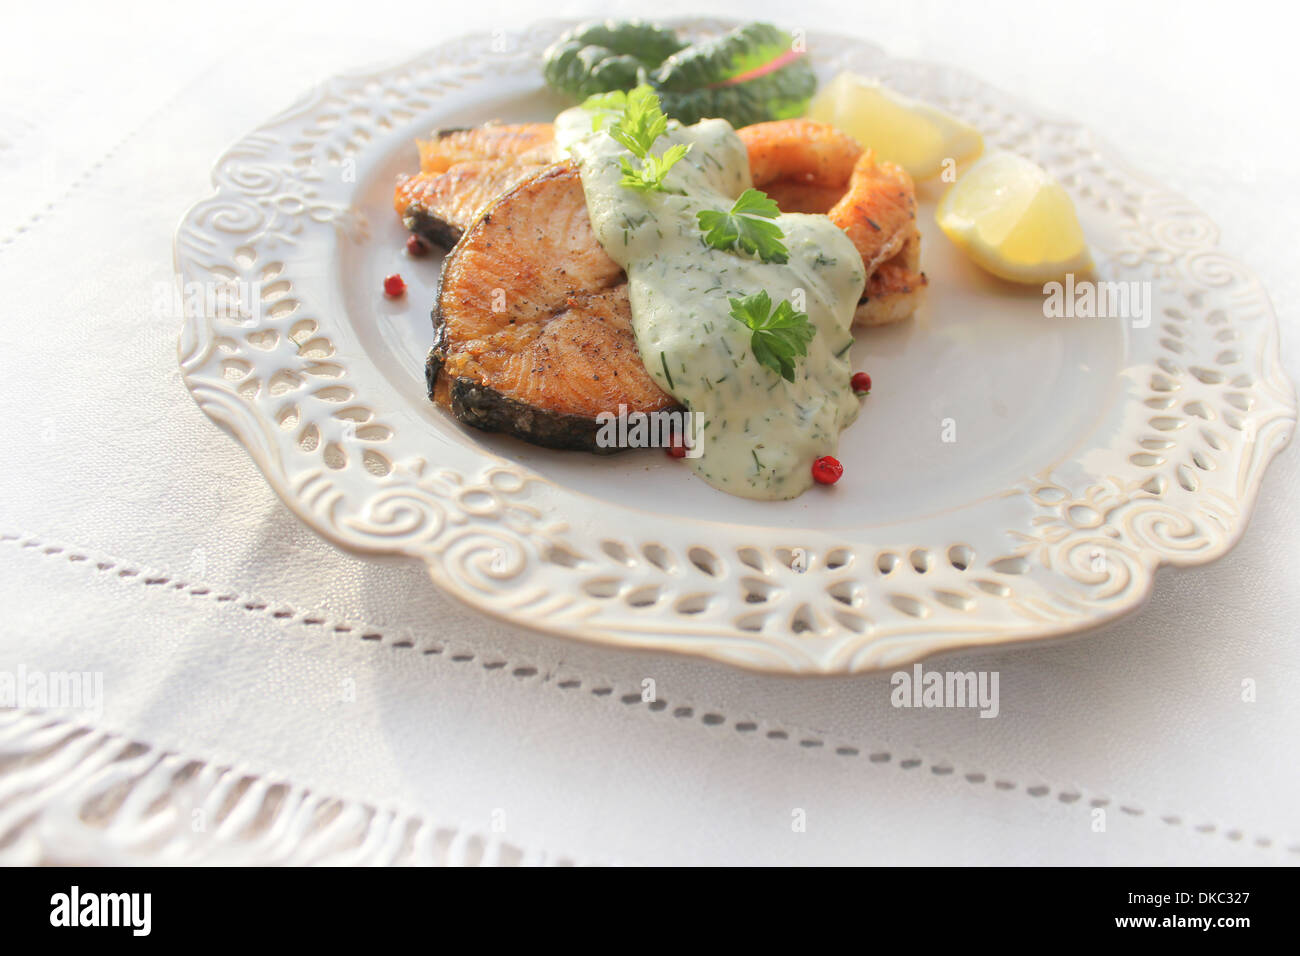 Roasted salmon with sauce Stock Photo